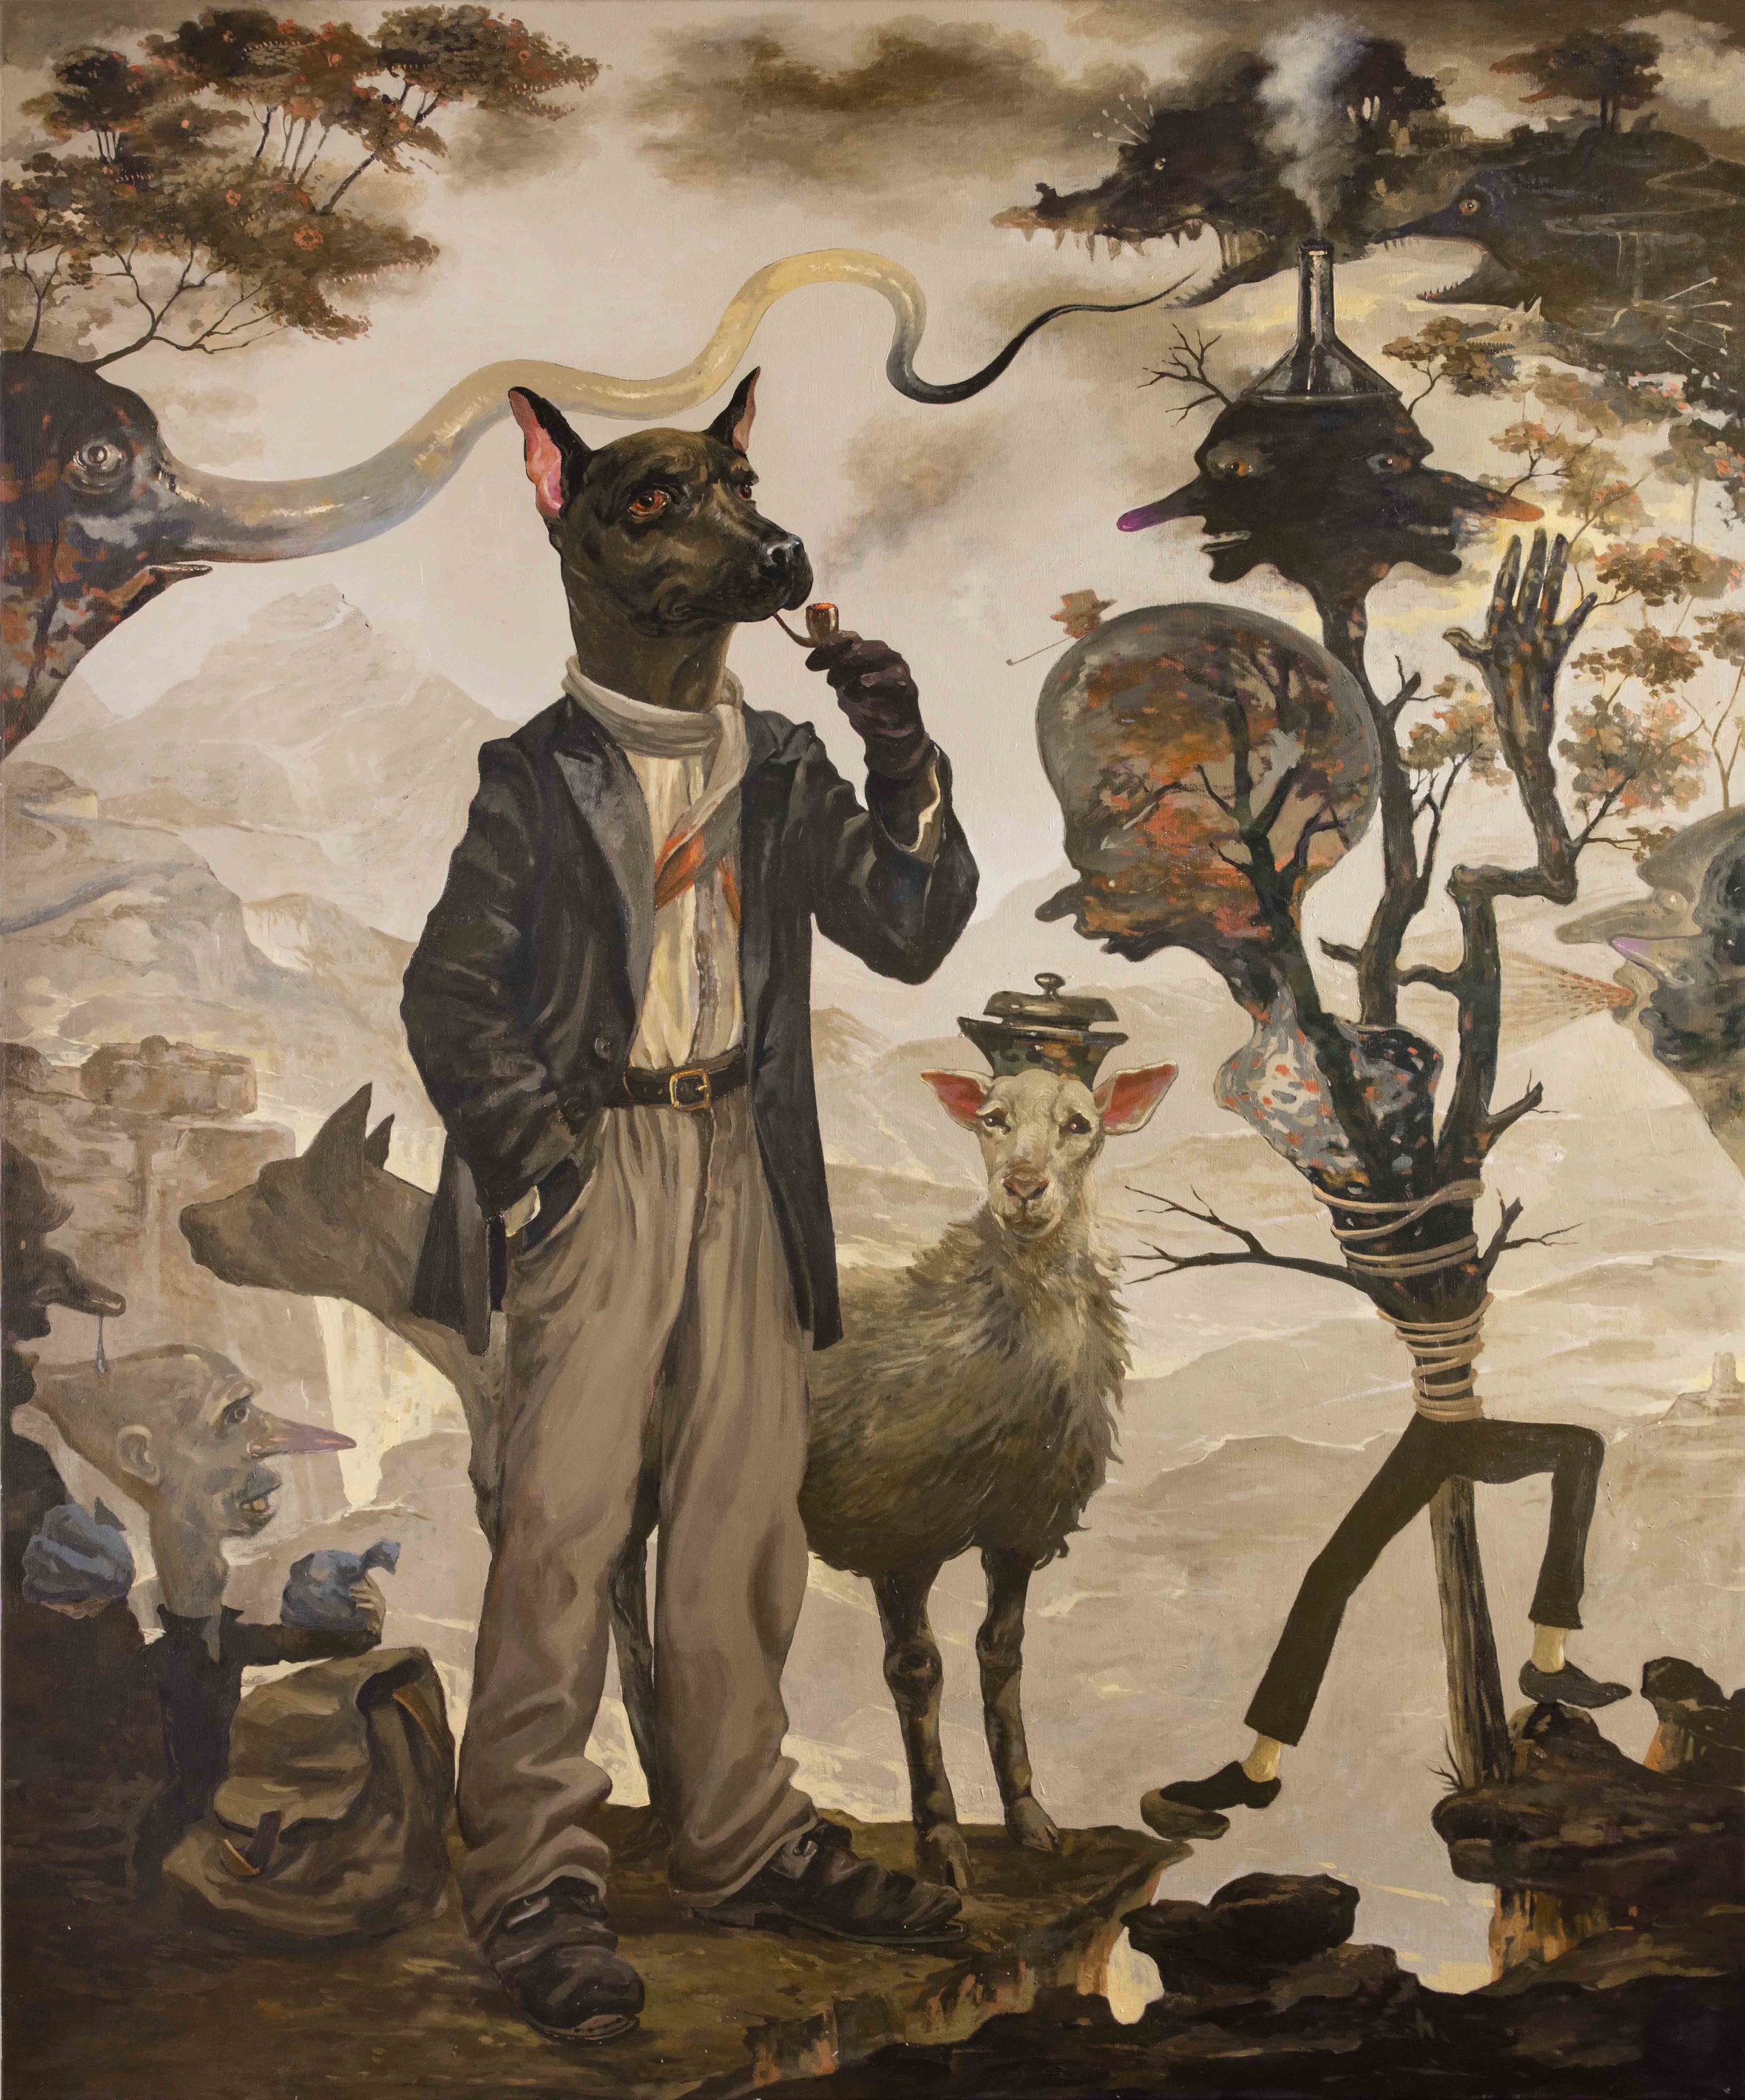  Michael Vale,&nbsp; Smoking Dog Surrounded By Phantoms , 2008, oil on linen, 183 x 152cm 